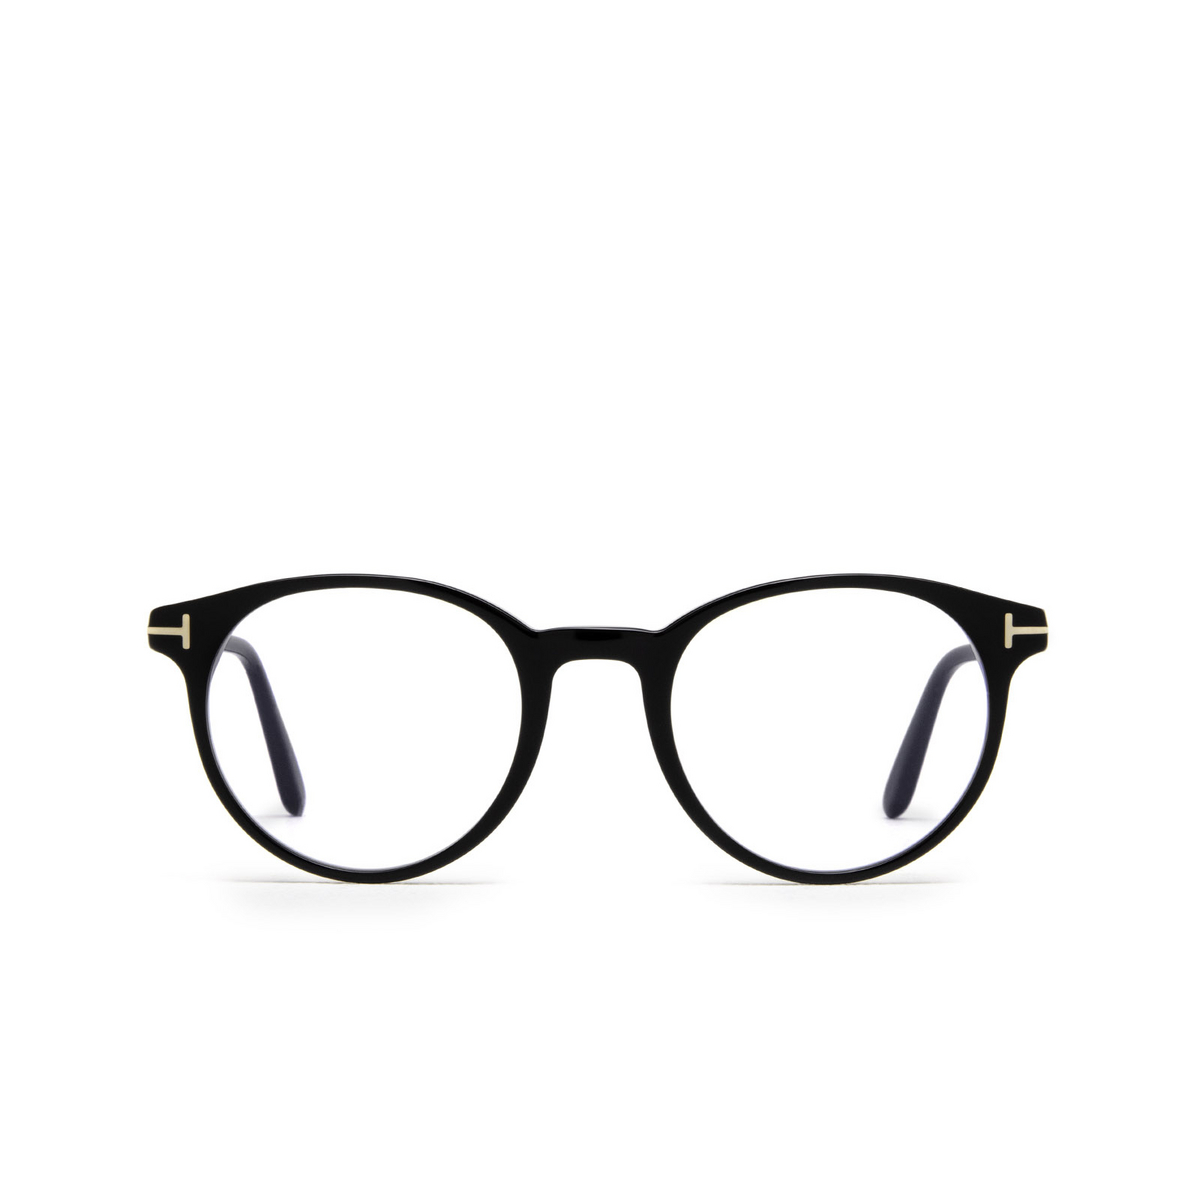 Tom Ford® Round Eyeglasses: FT5695-B color Black 001 - front view.